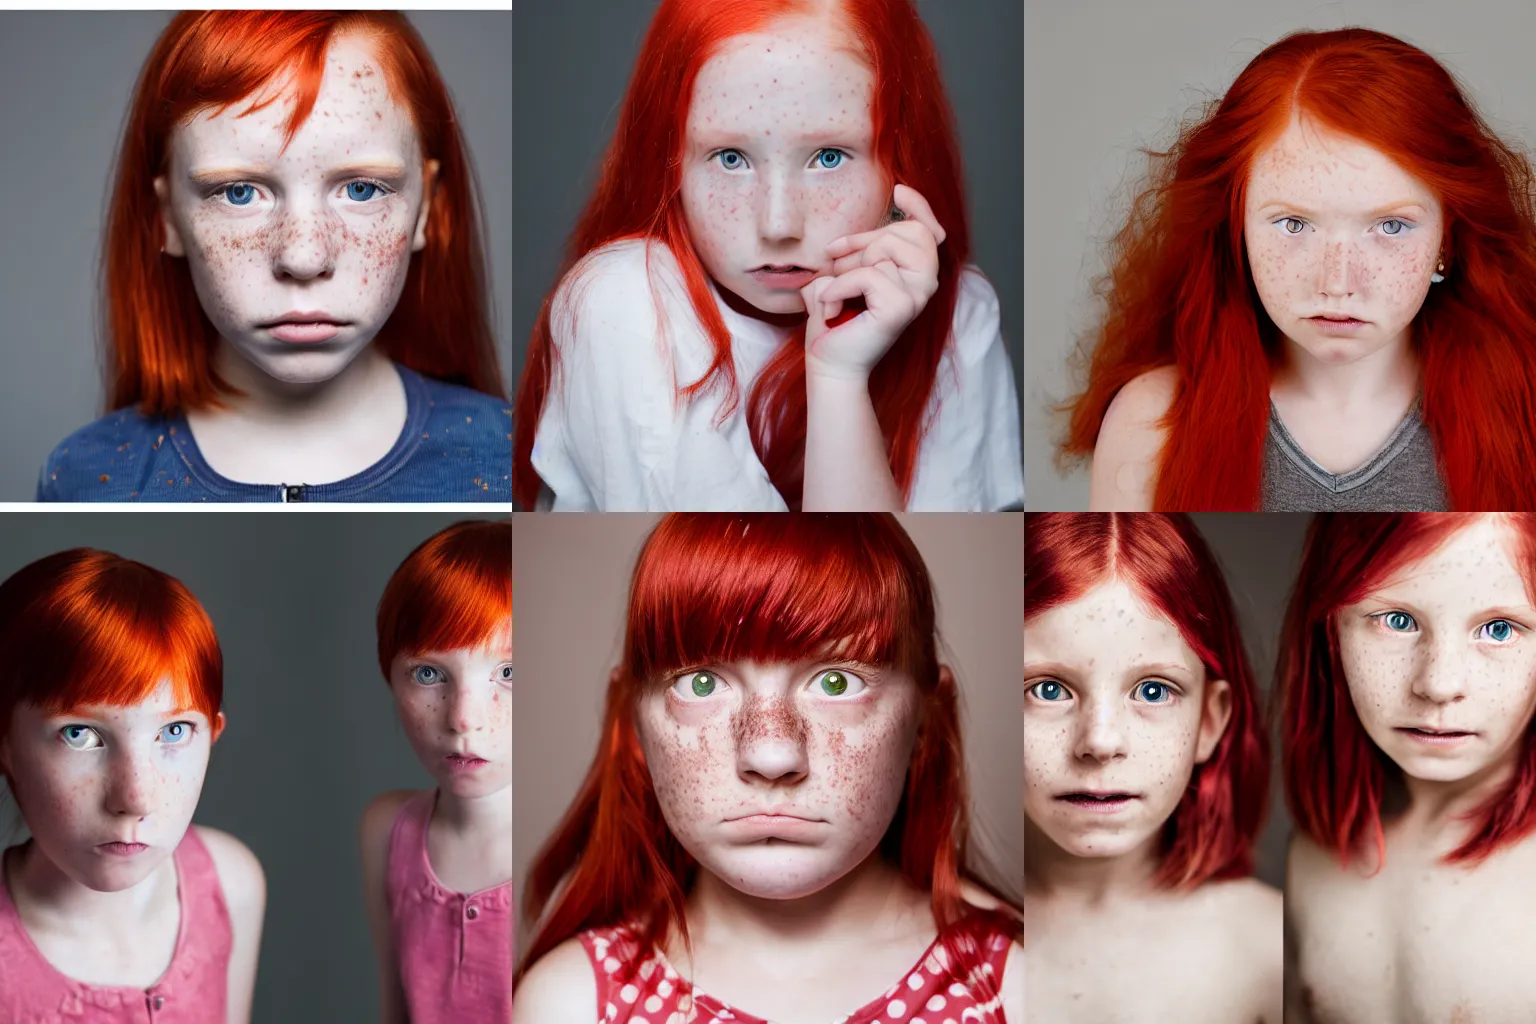 Prompt: A 10 year old girl with a serious expression, red hair, freckles, studio quality, studio lighting